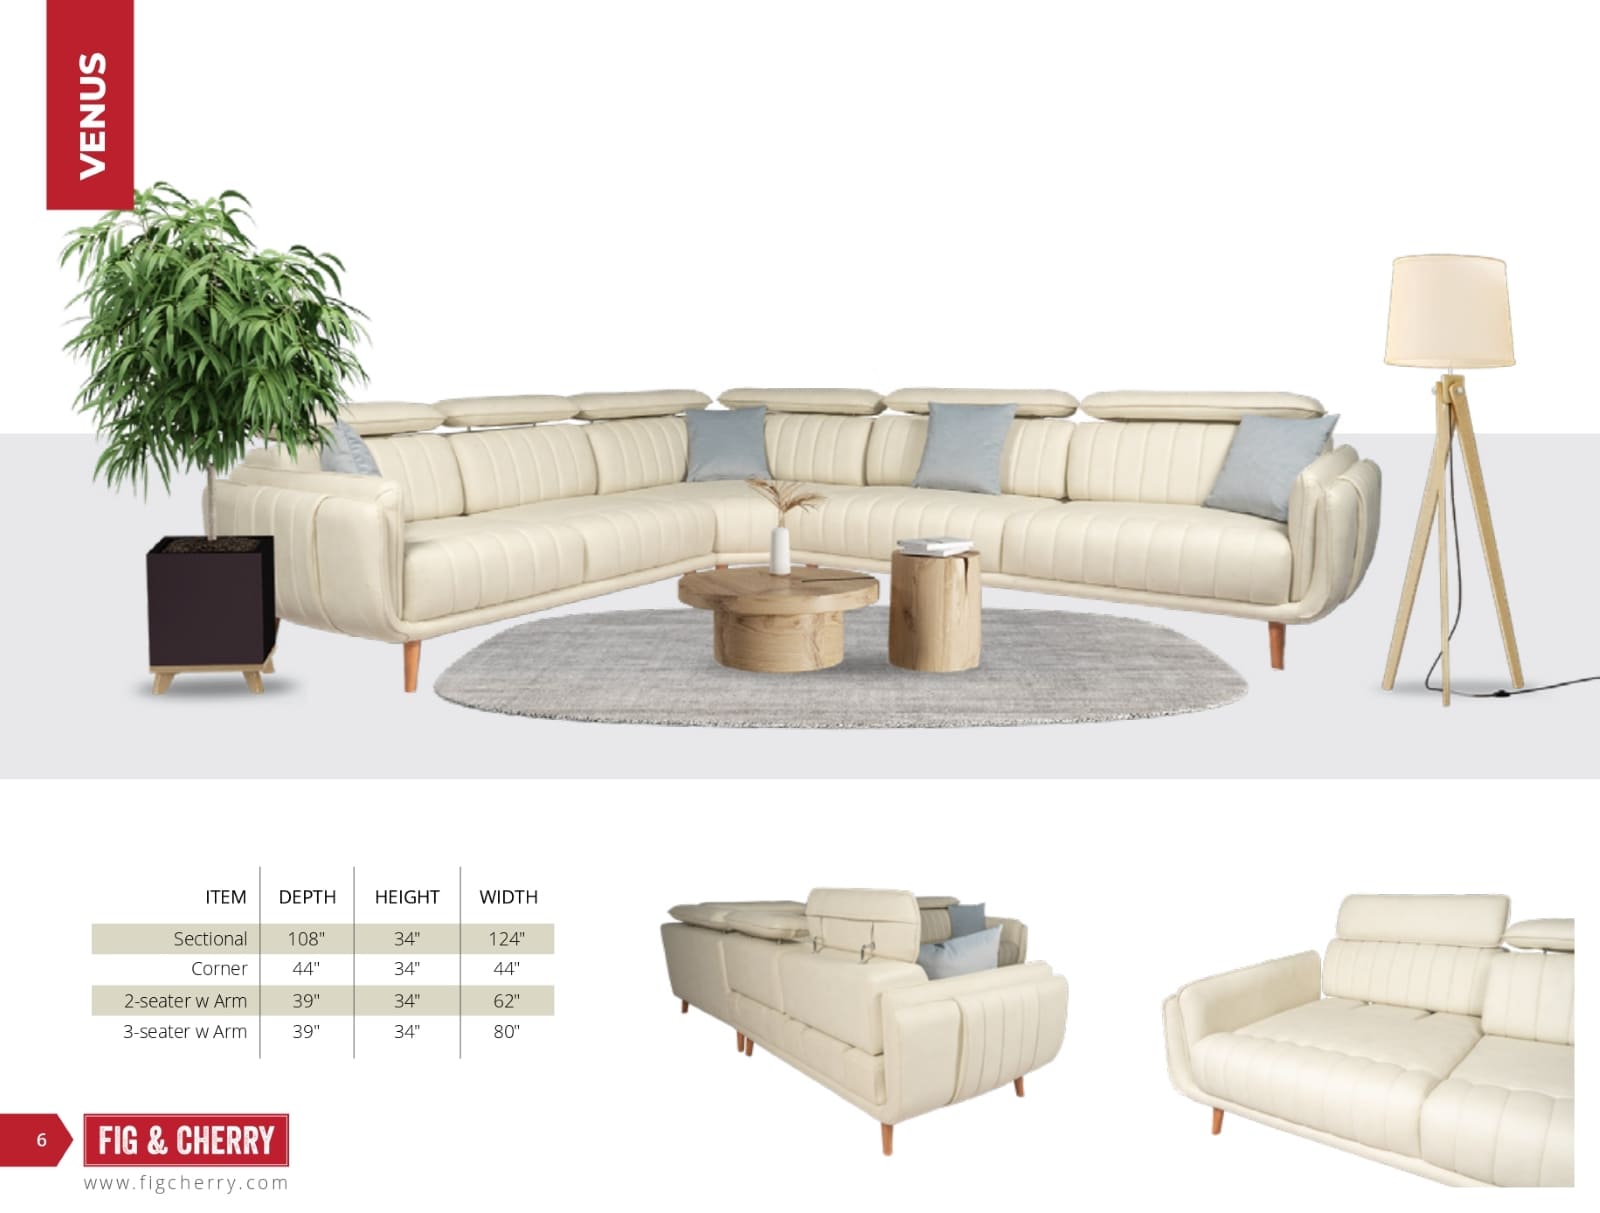 Fig & Cherry Indoor Collection (Sofas and Sectionals) Catalog (6)